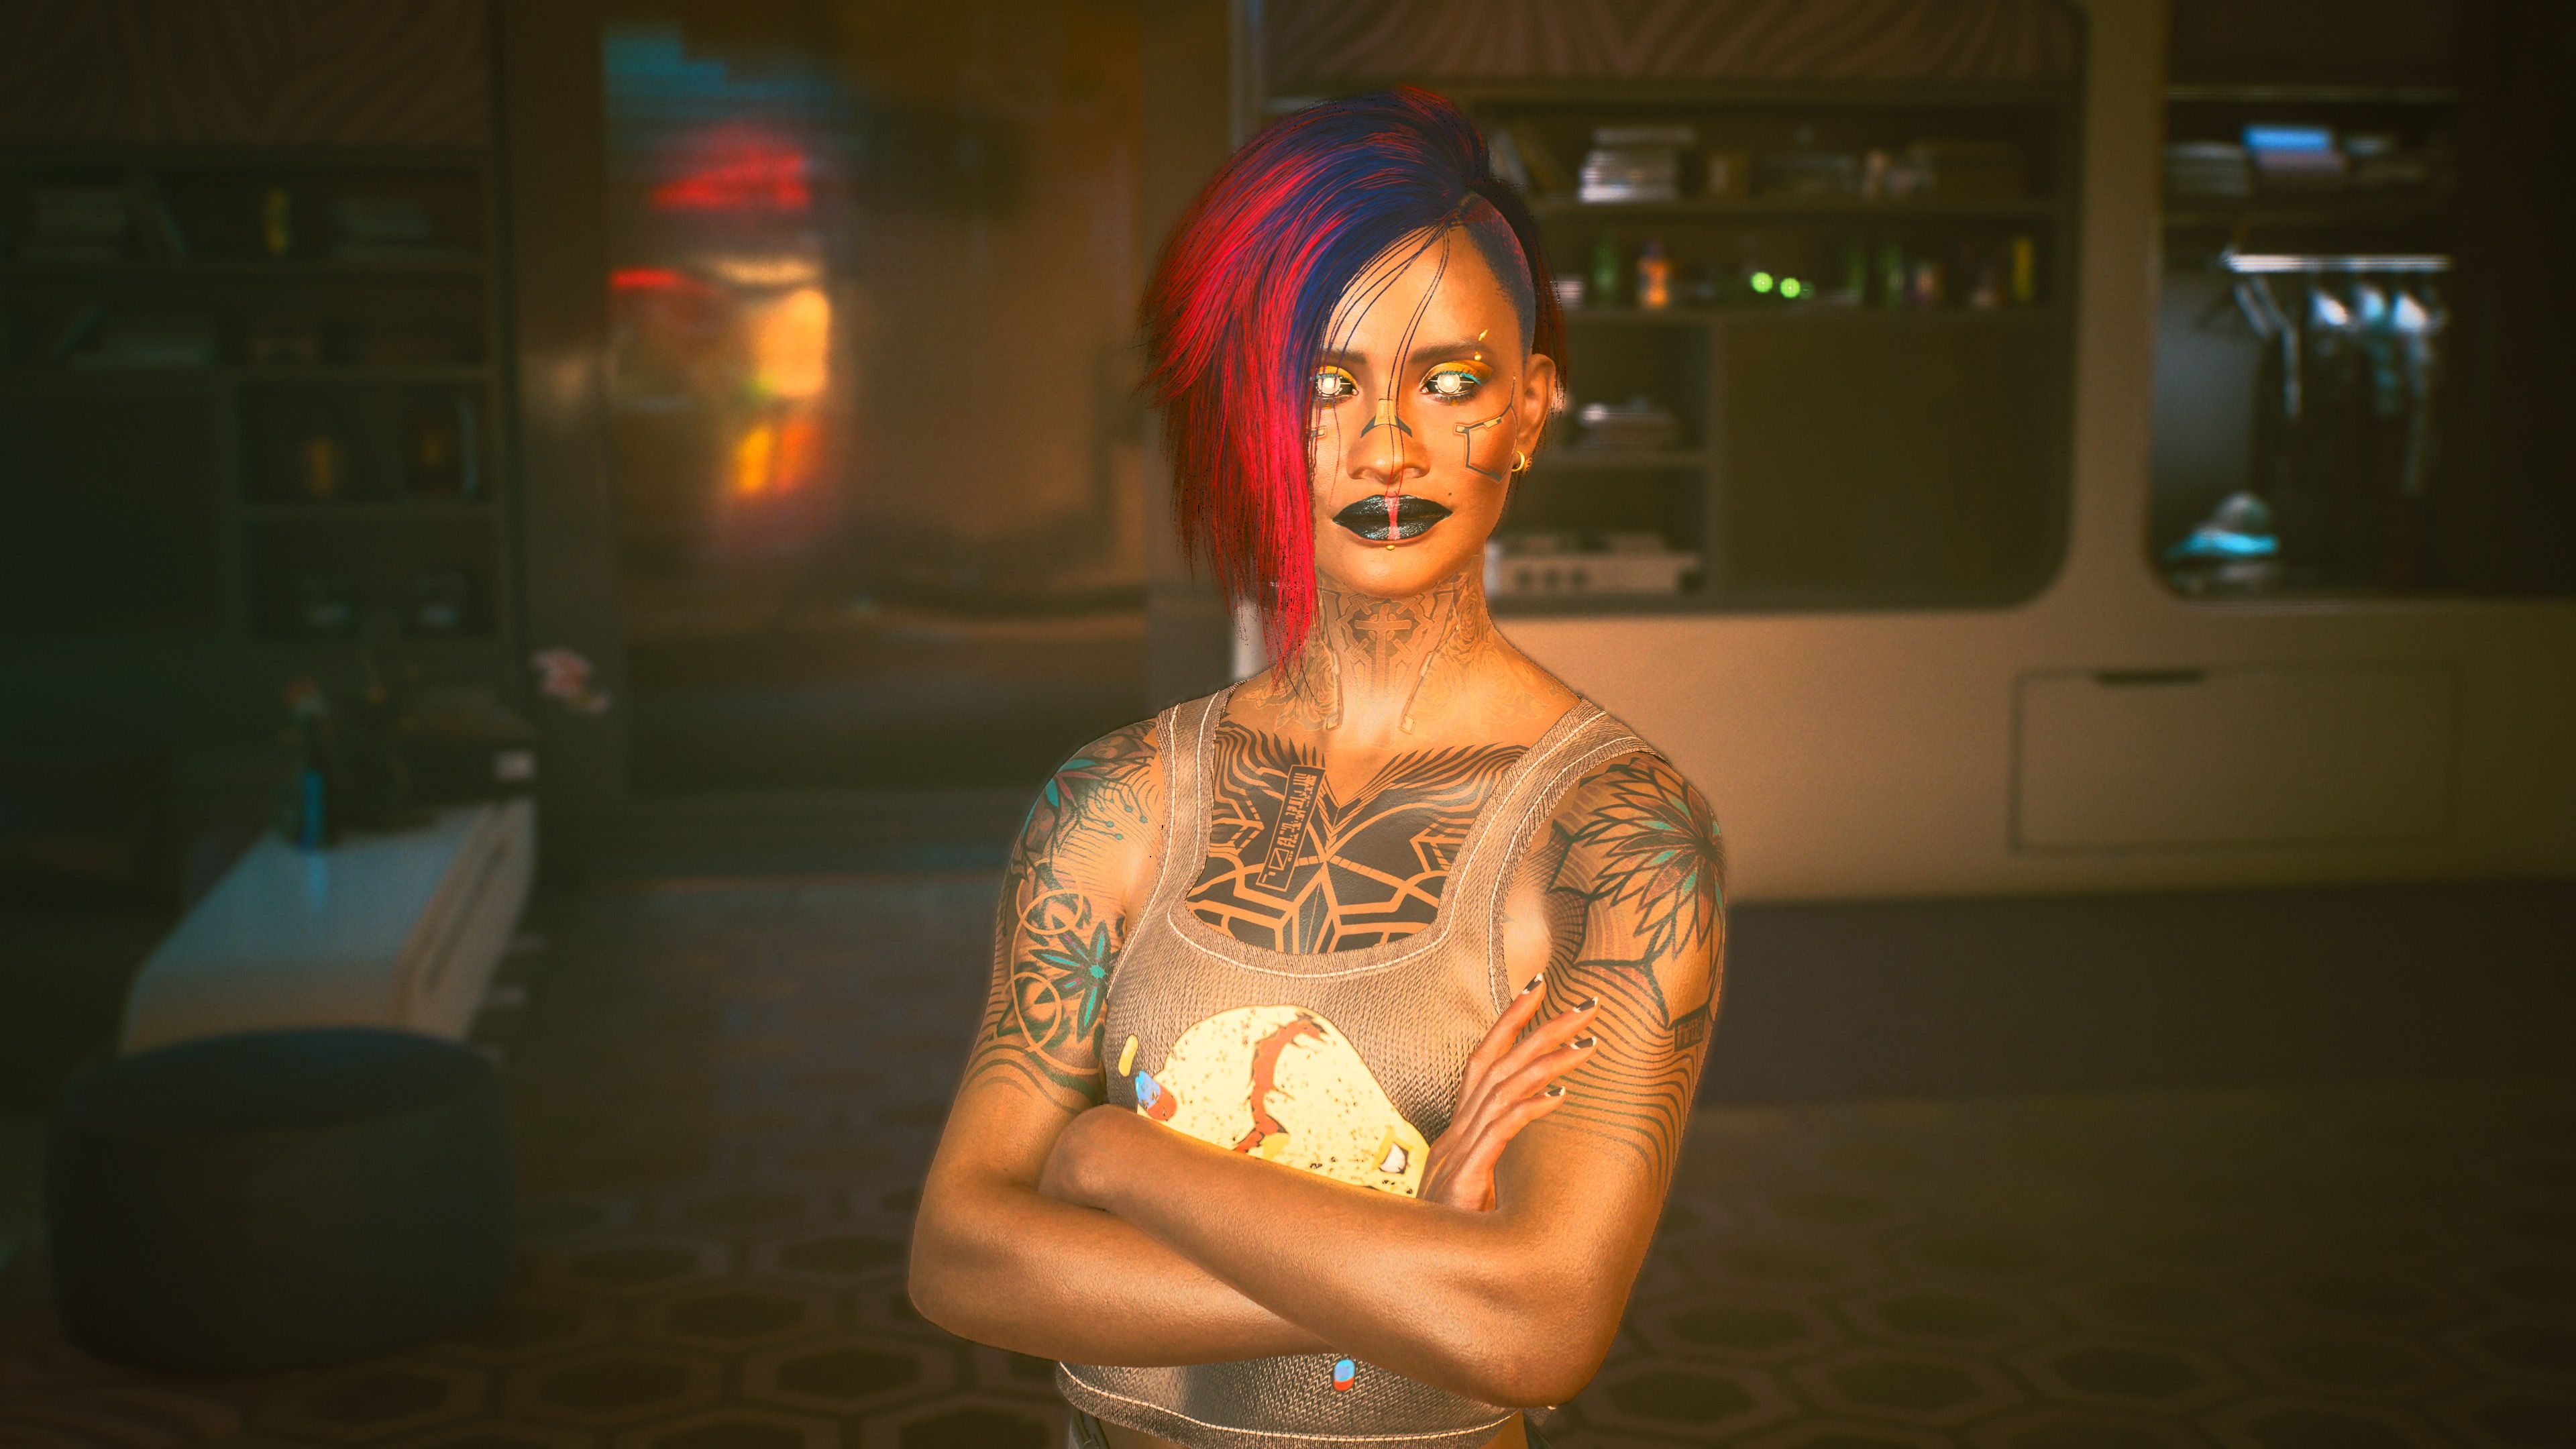 A screenshot of my character in the video game Cyberpunk 2077. She's Black and has purple/blue hair on one side of her head, with the other side shaved, she's got lots of tattoos on her chest and arms, and her eyes are glowing cybernetics. She has some electronic inlays in the skin on her face, and she's wearing black lipstick. She's standing with her arms crossed and a look of satisfaction on her face.